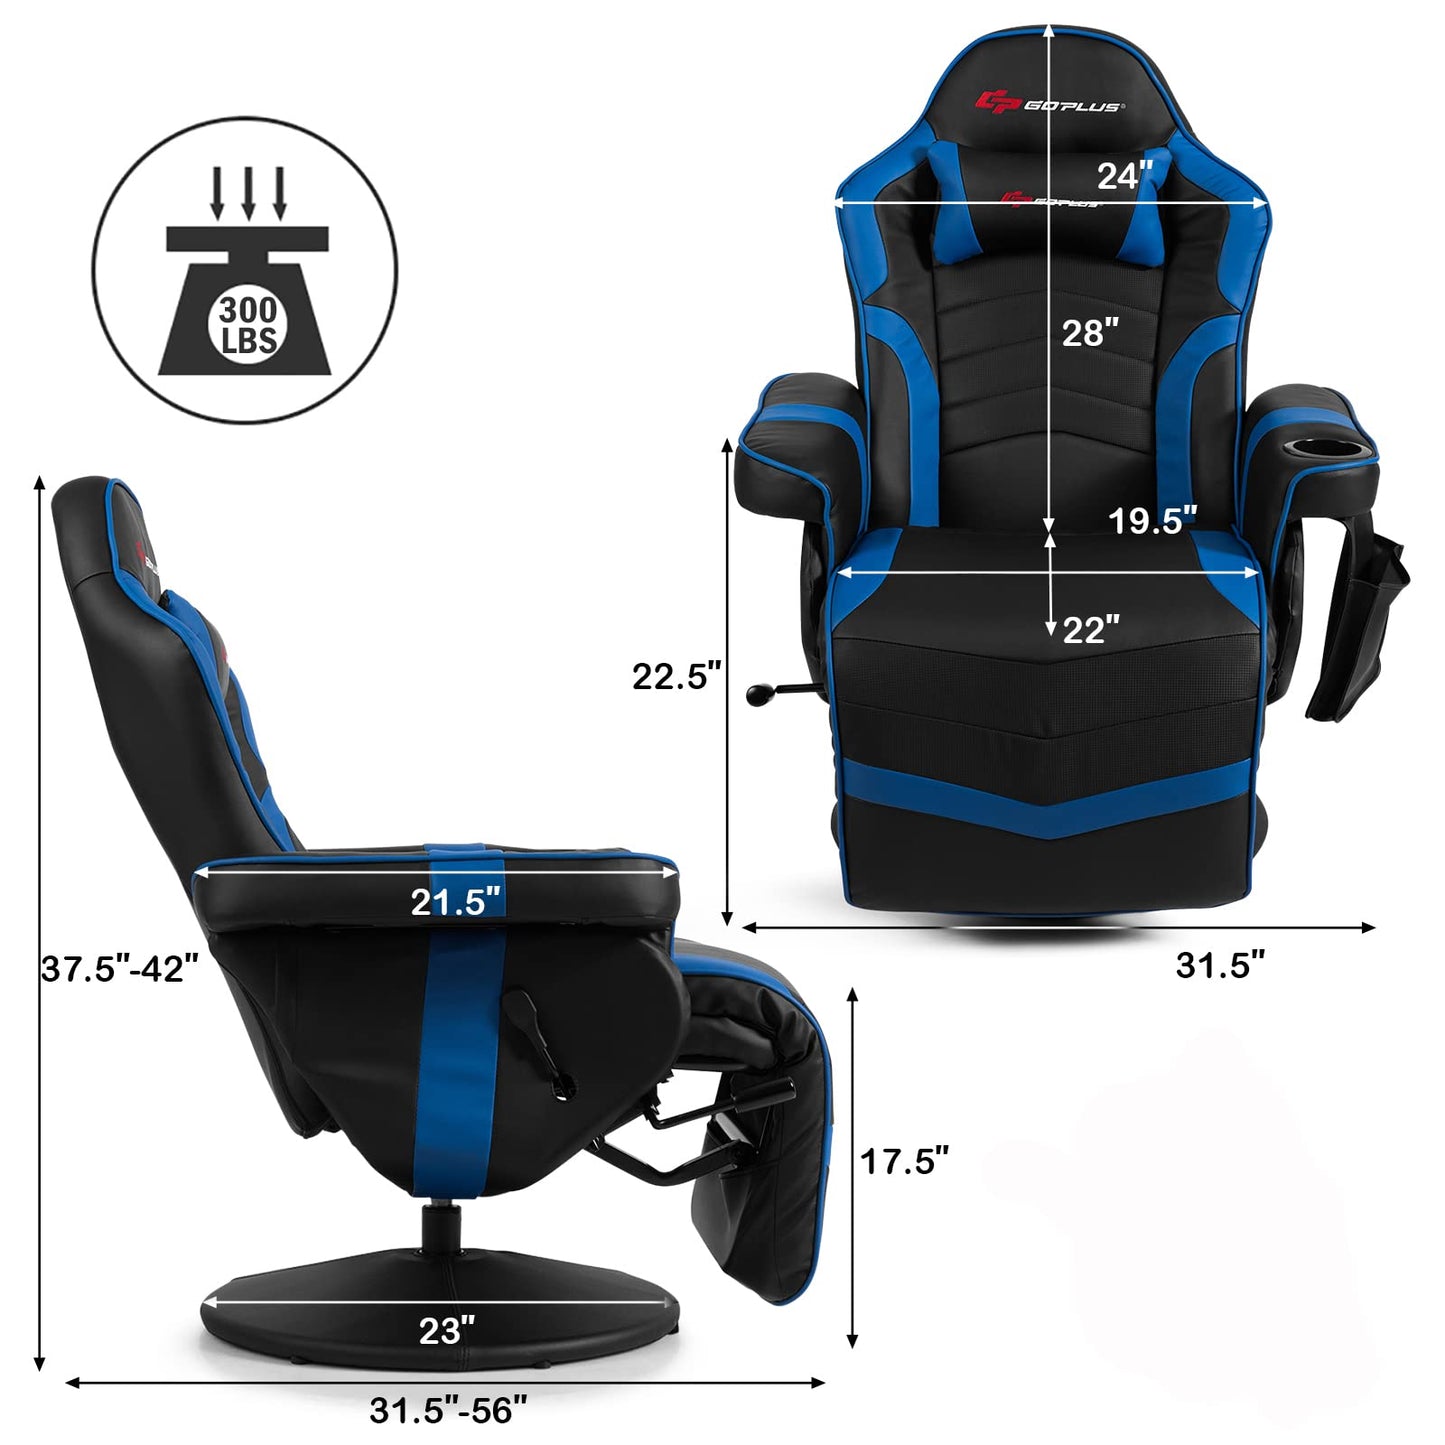 POWERSTONE Gaming Recliner Massage Gaming Chair with Footrest Ergonomic PU Leather Single Sofa with Cup Holder Headrest and Side Pouch, Adjustable Living Room Chair Seating, Navy Blue - Game-Savvy